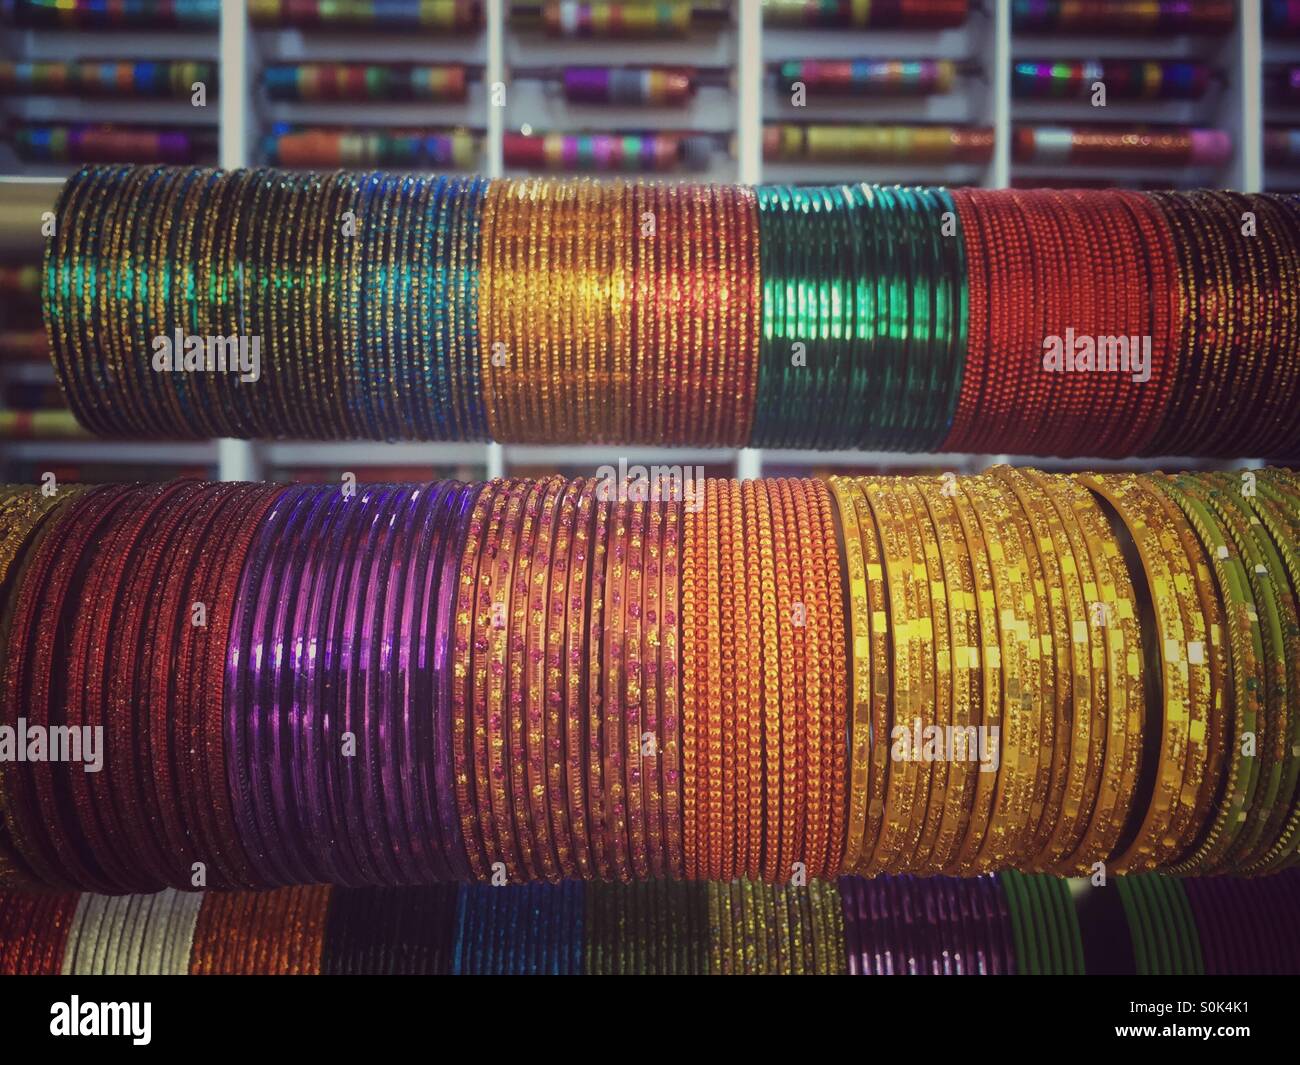 colorful, sparkly bangles for sale Stock Photo